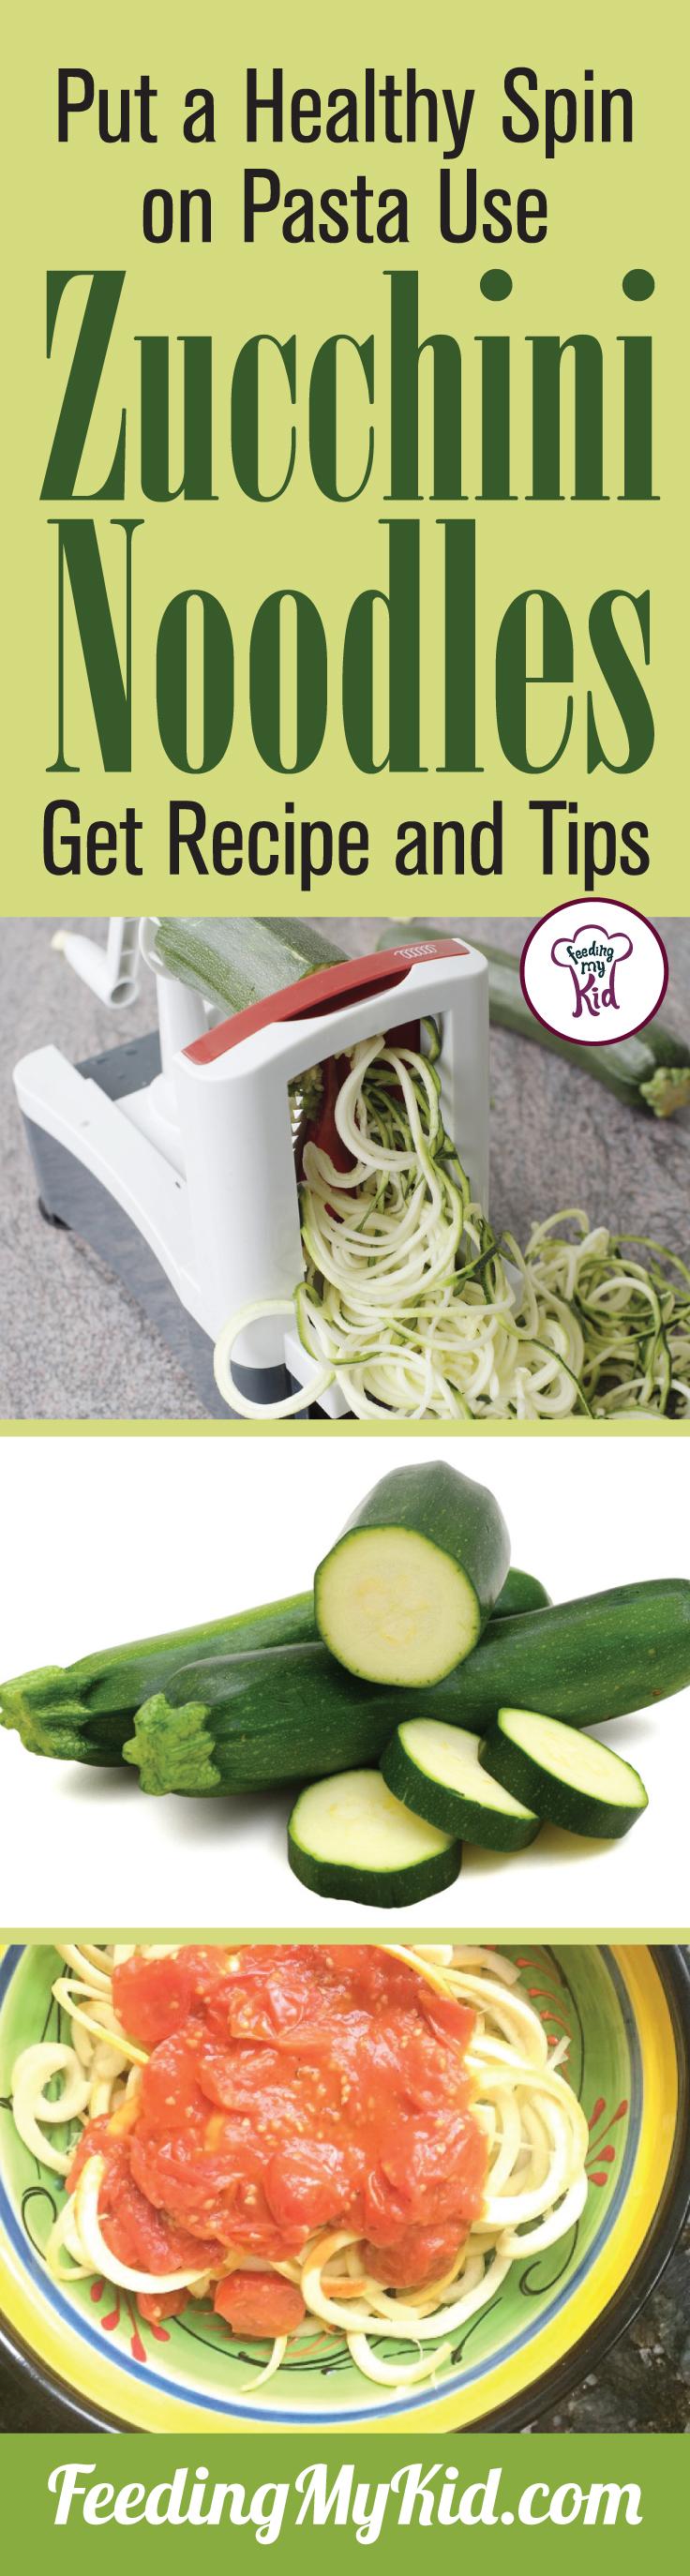 Find out how you can put a spin on zucchini with a vegetable spiralizer to get kids having fun and eating! Plus a great zoodle recipe! Feeding My Kid is a filled with all the information you need about how to raise your kids, from healthy tips to nutritious recipes. #recipes #zucchini #noodles #zoodles #dabblingchef